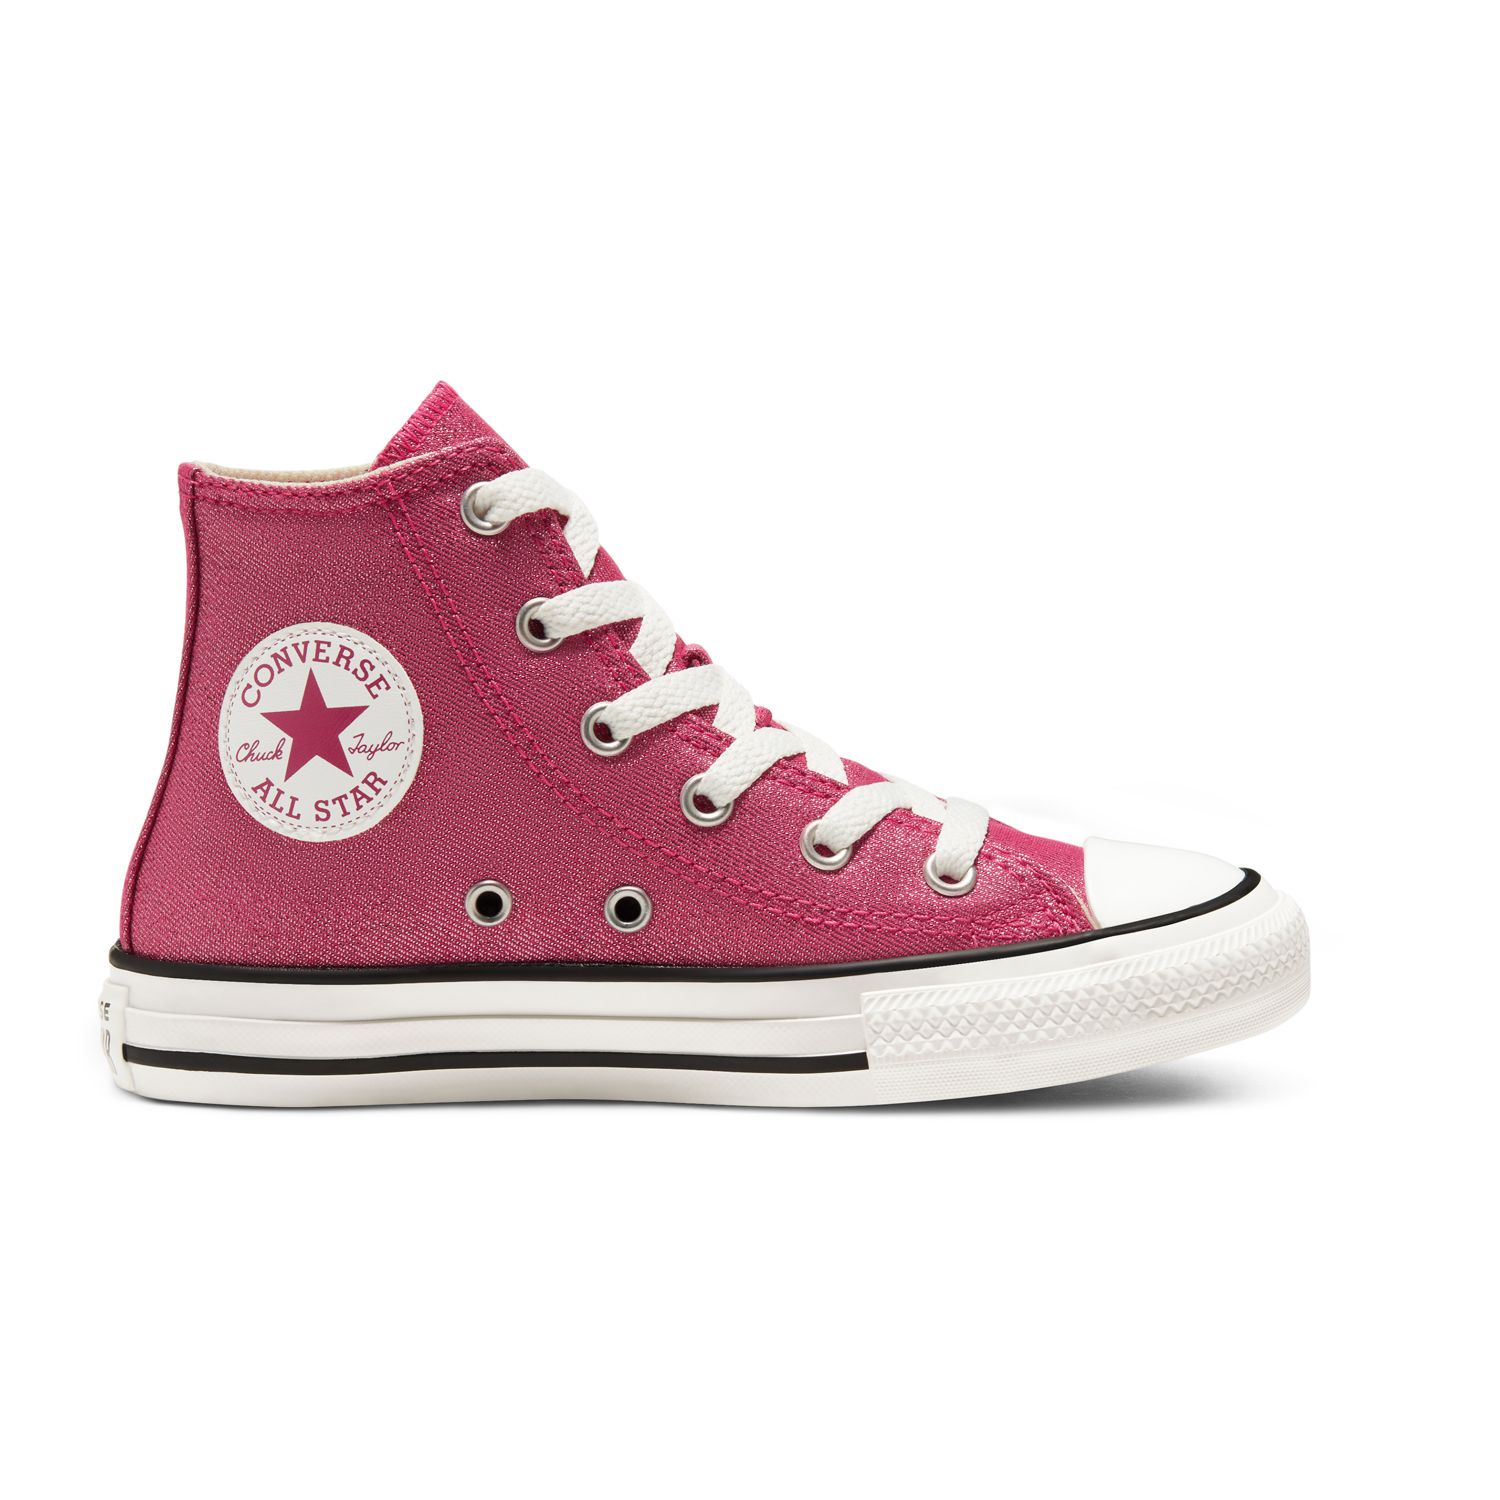 sparkly pink converse high tops